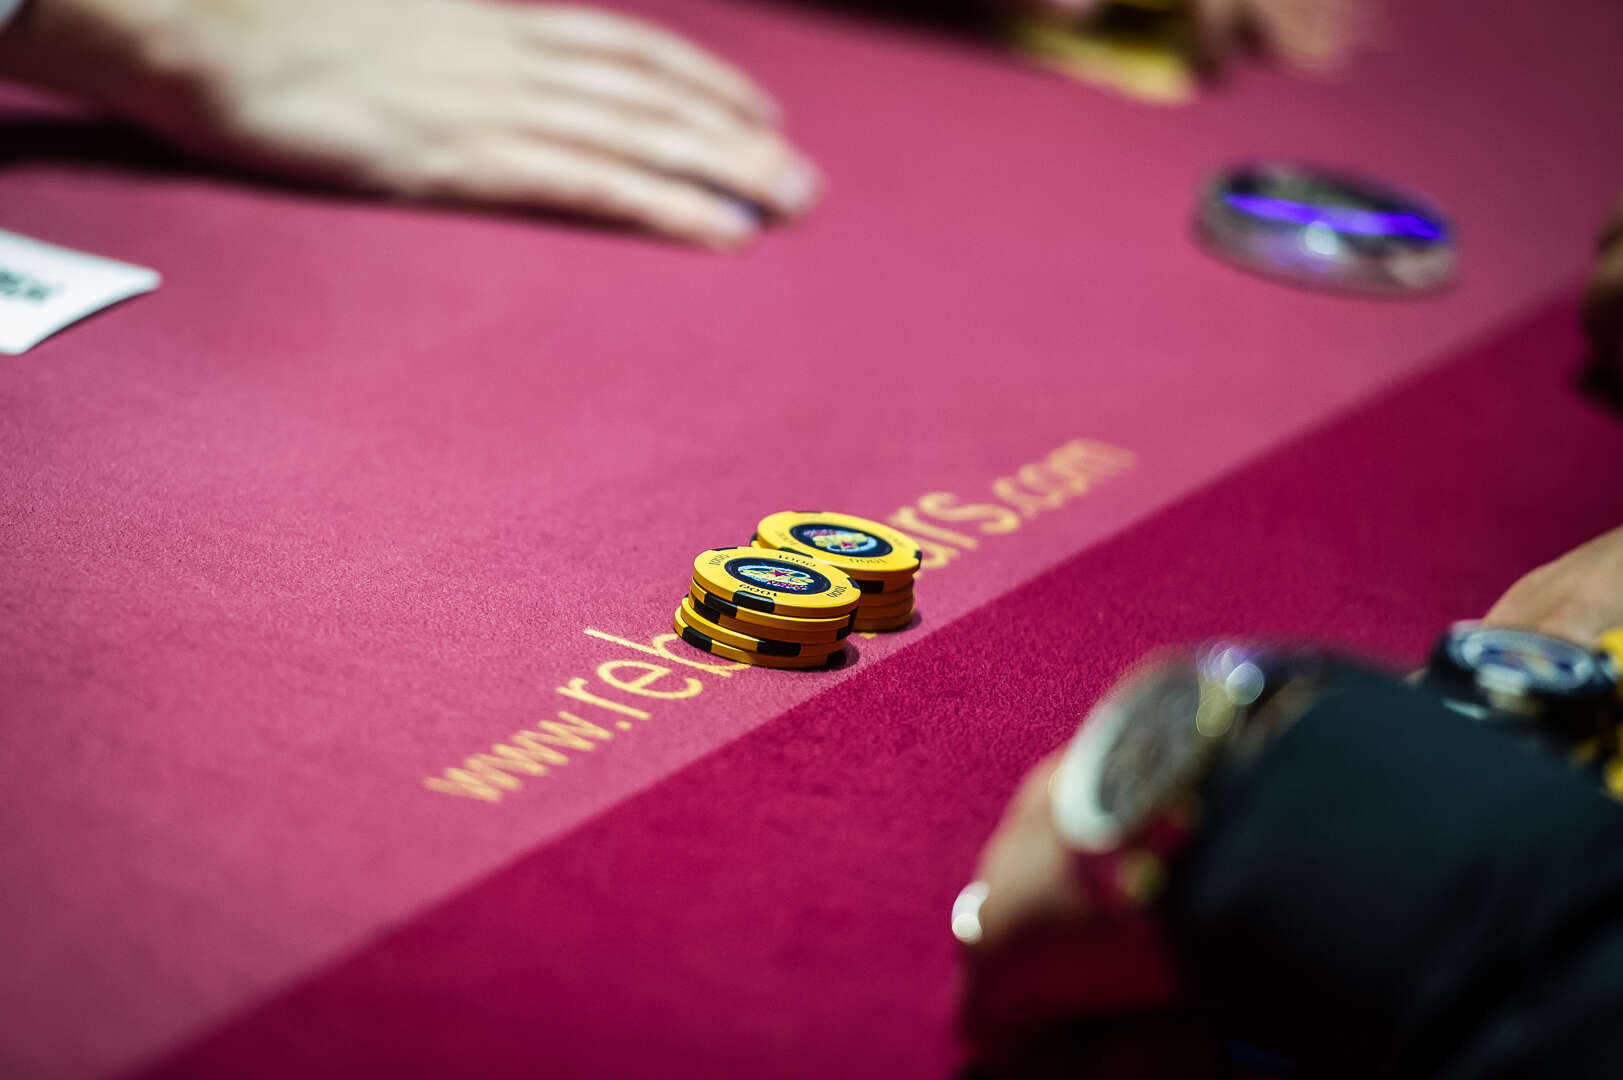 July will bring poker guarantees for more than €30,000 to Zvolen